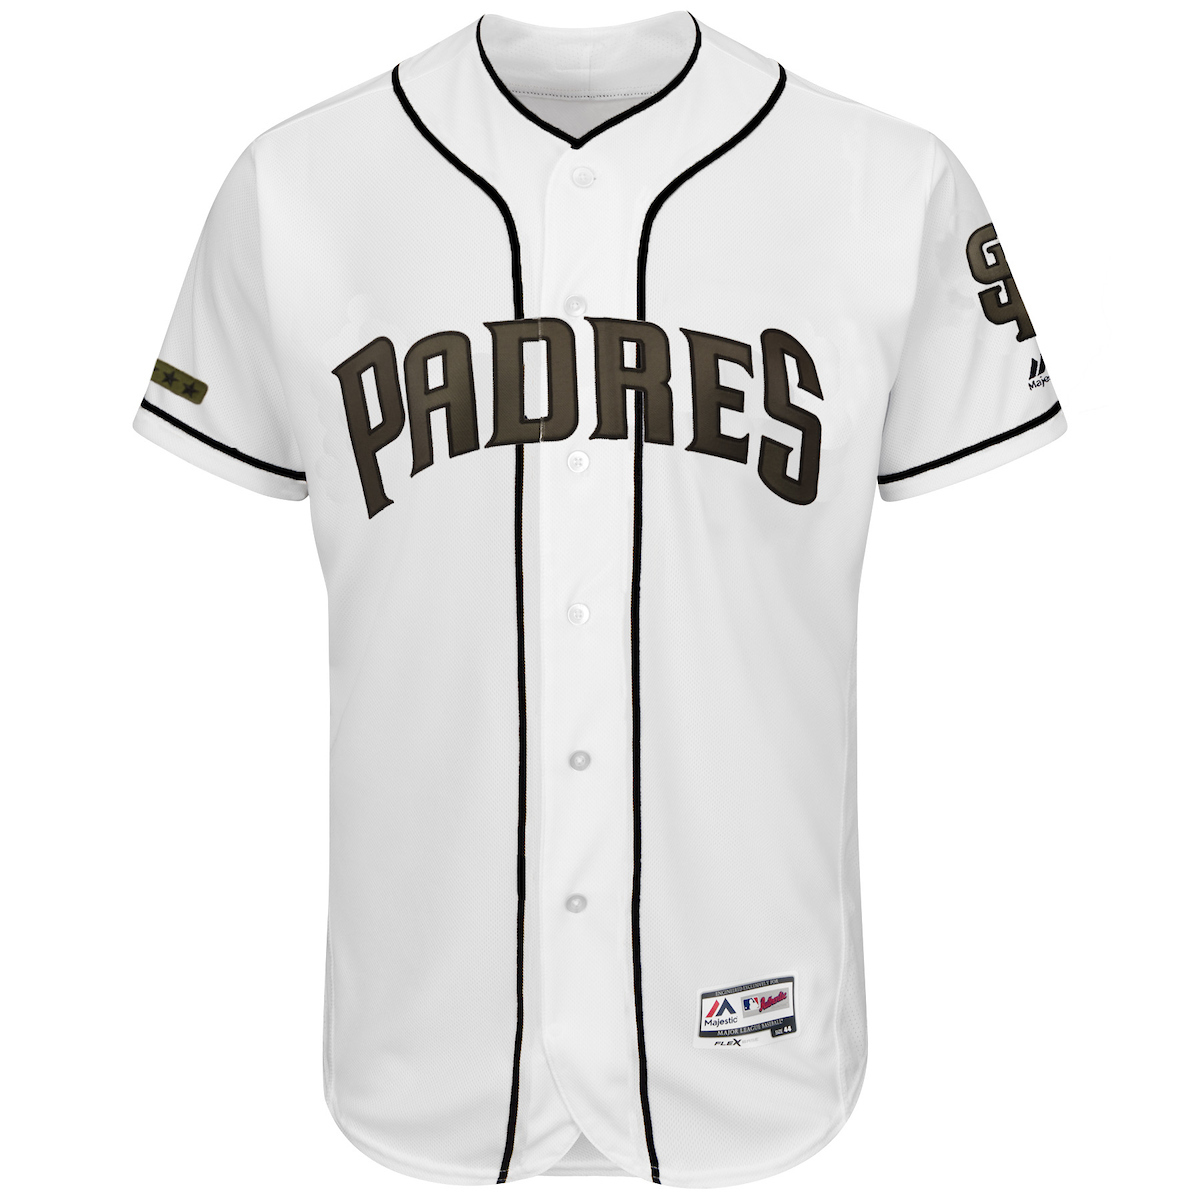 Padres Holiday Uniforms Unveiled – NBC 7 San Diego